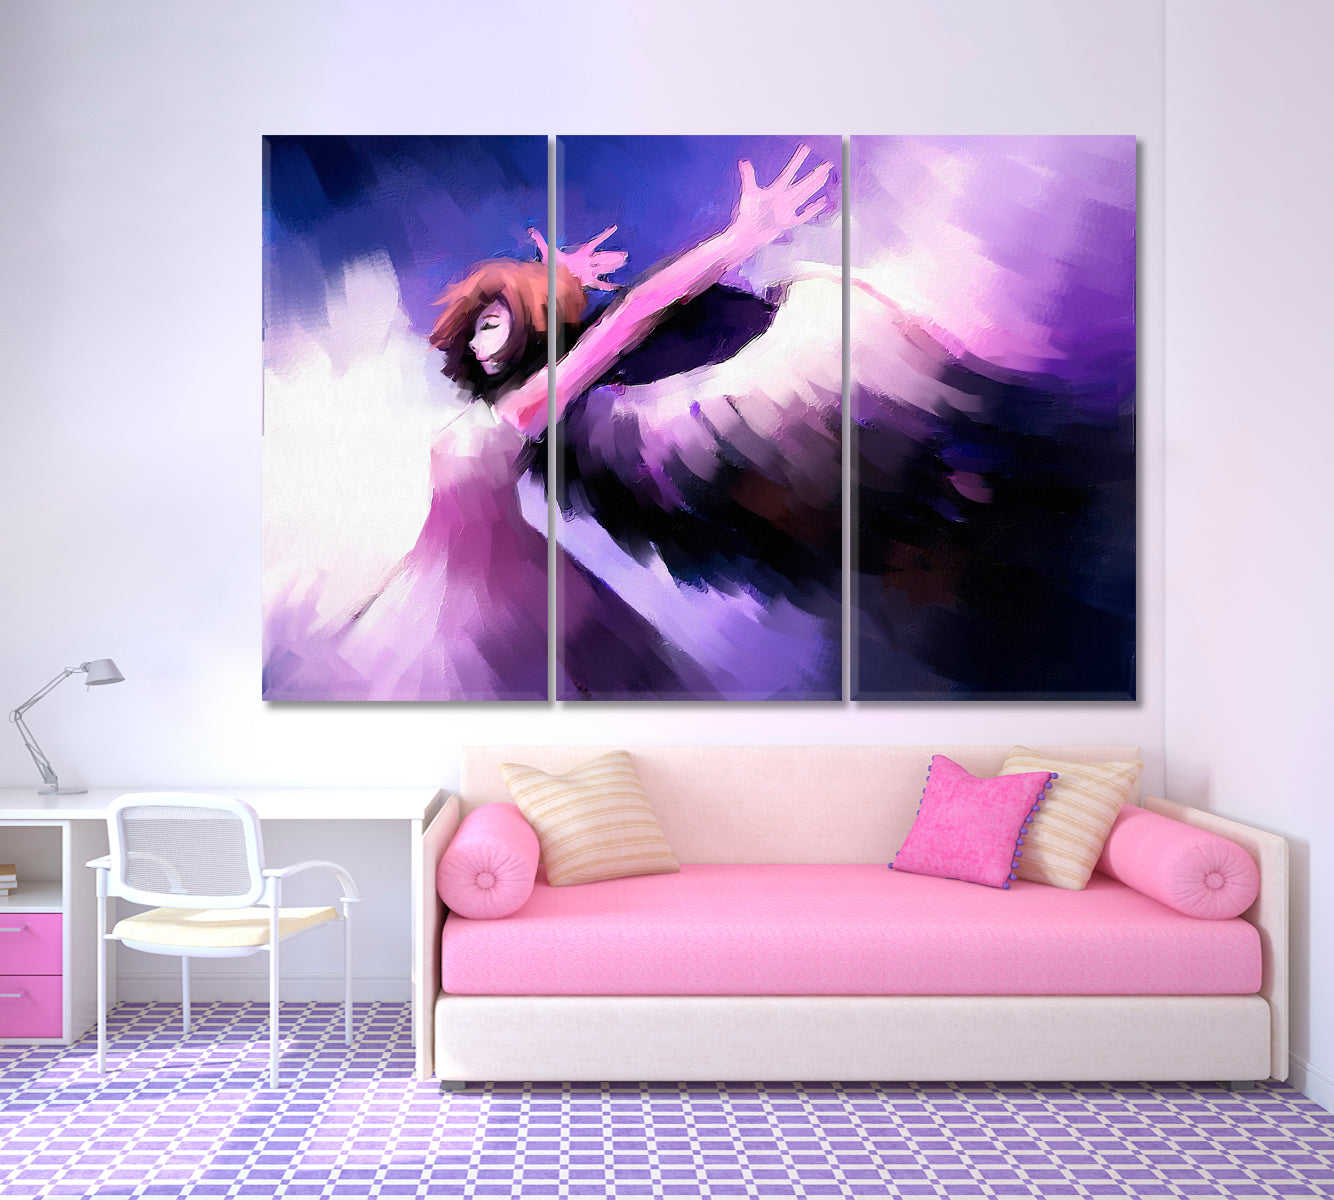 I'm Flying Angel Girl With Wings Fine Art Canvas Print TV, Cartoons Wall Art Canvas Artesty 3 panels 36" x 24" 